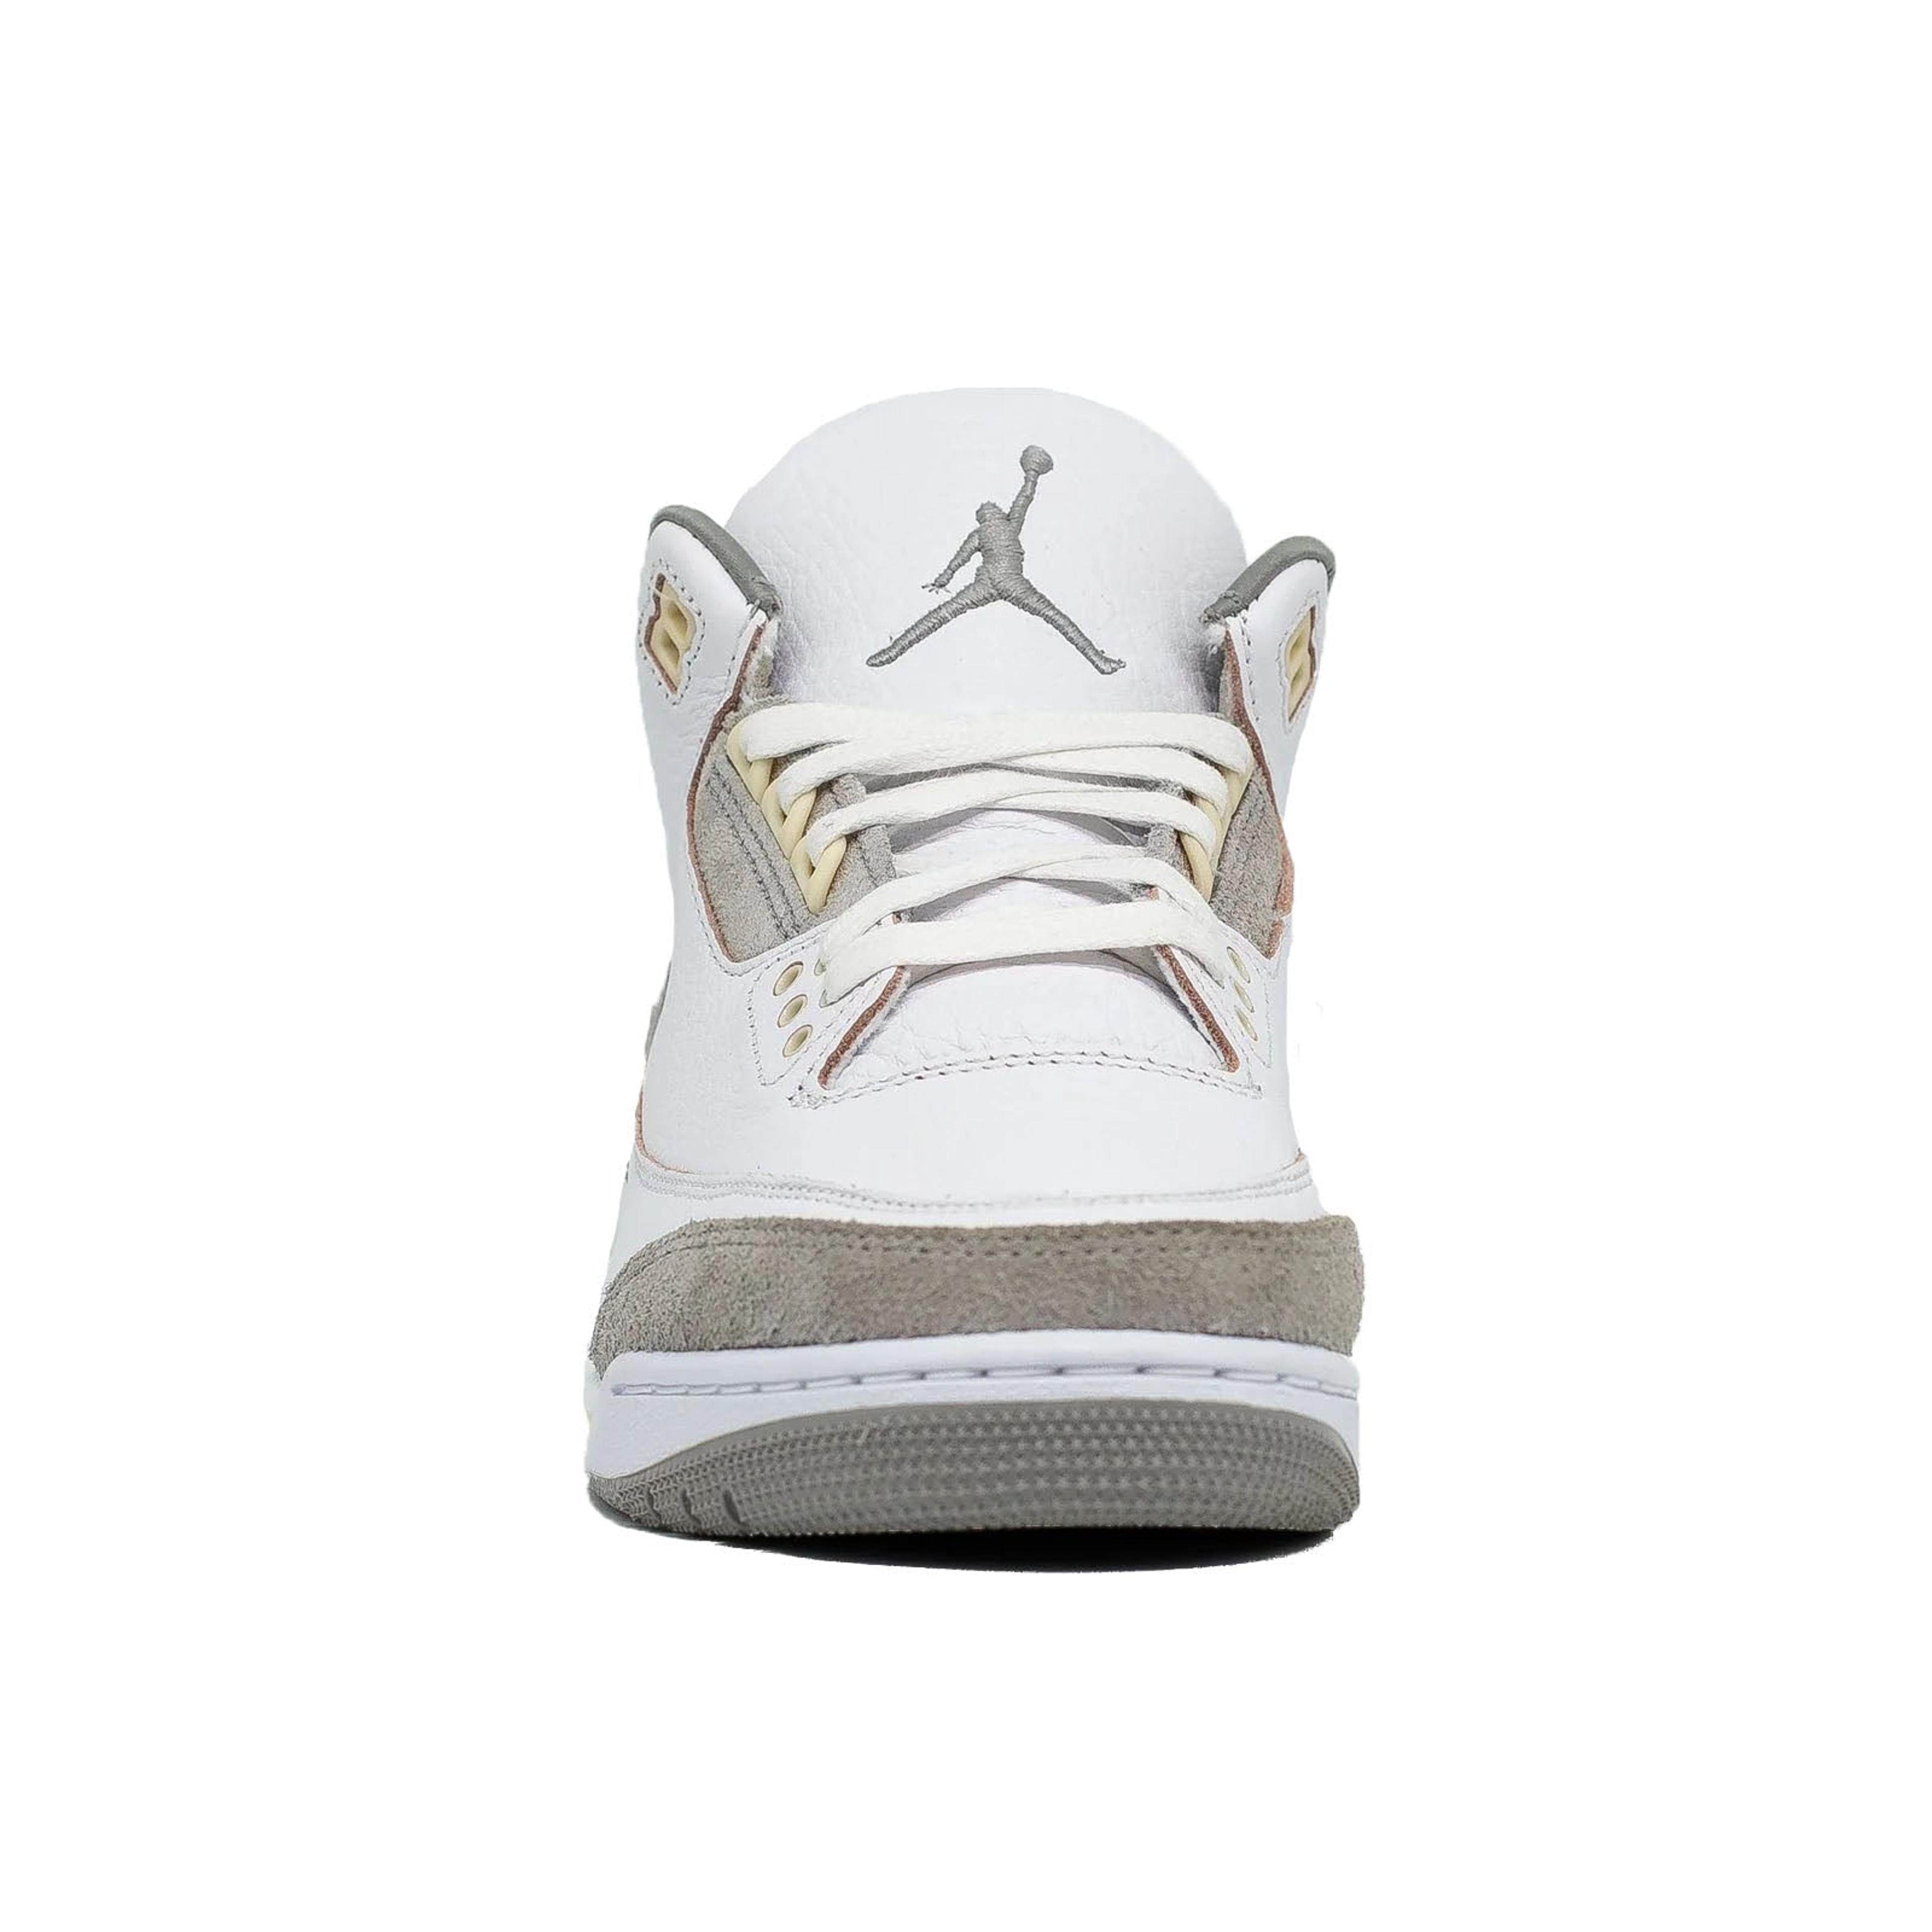 Alternate View 2 of Women's Air Jordan 3, A Ma Maniére Raised By Women